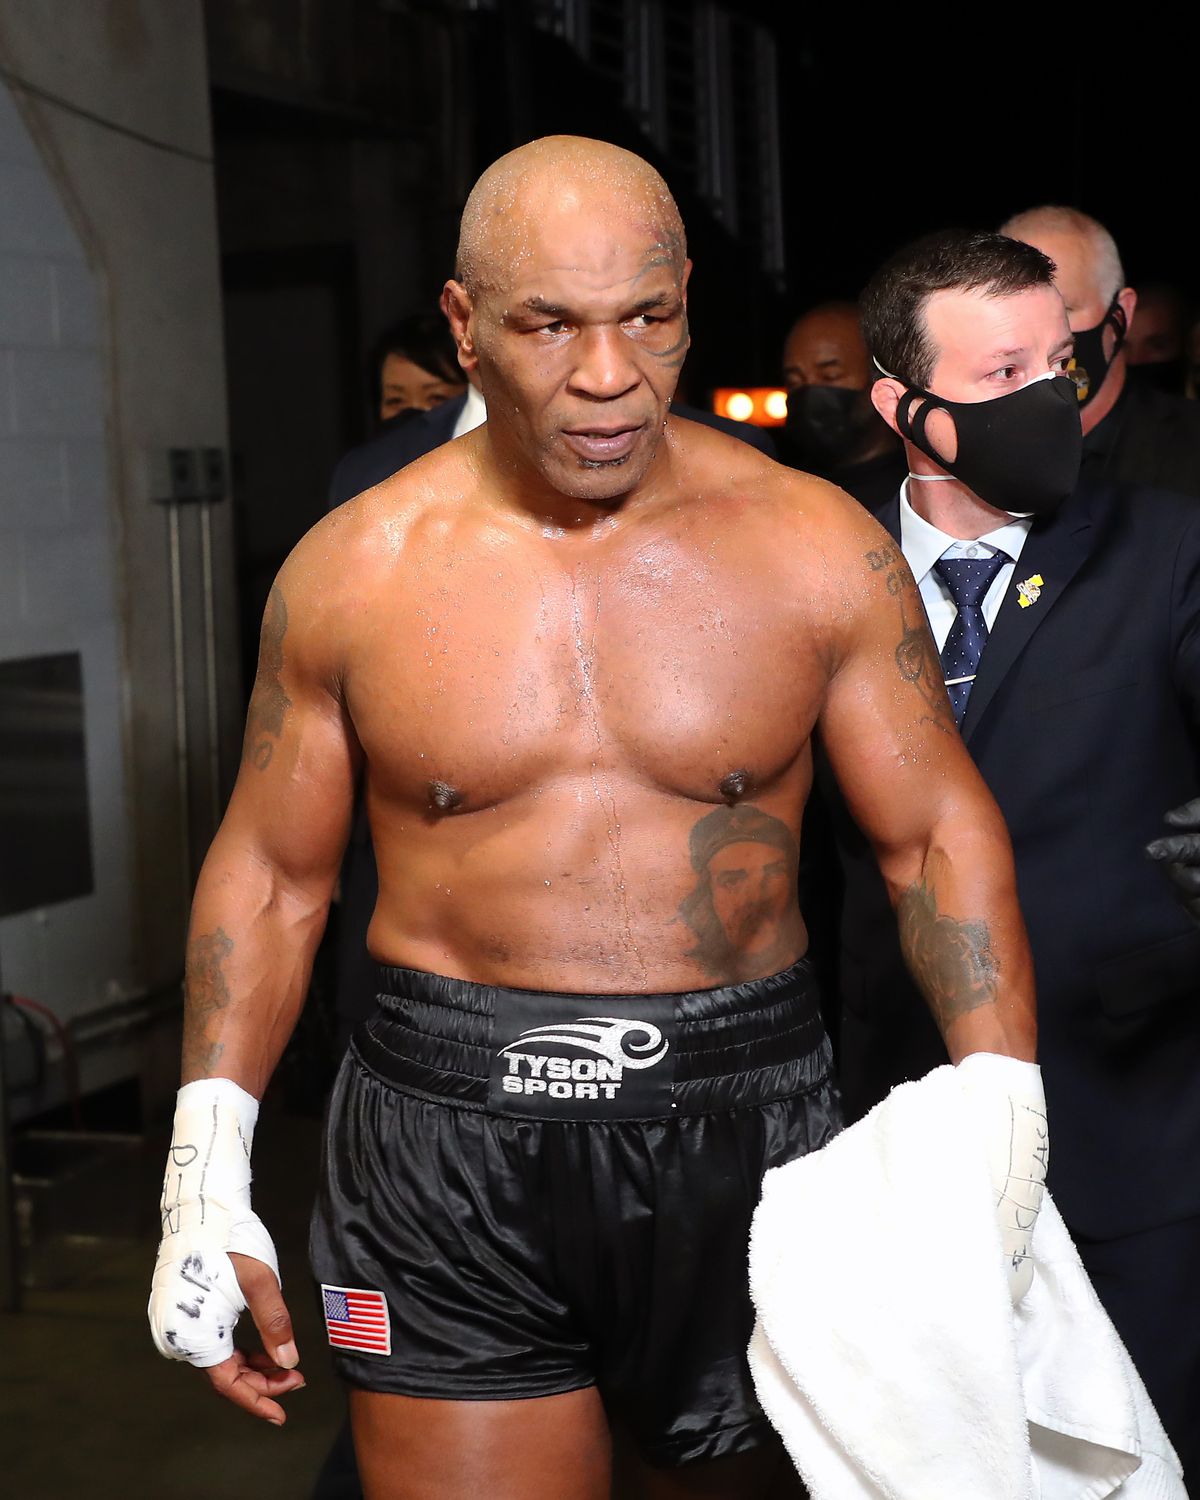 Mike Tyson (black trunks) Exits The Ring After His Split Draw Against Roy Jones, Jr. On November 28, 2022 